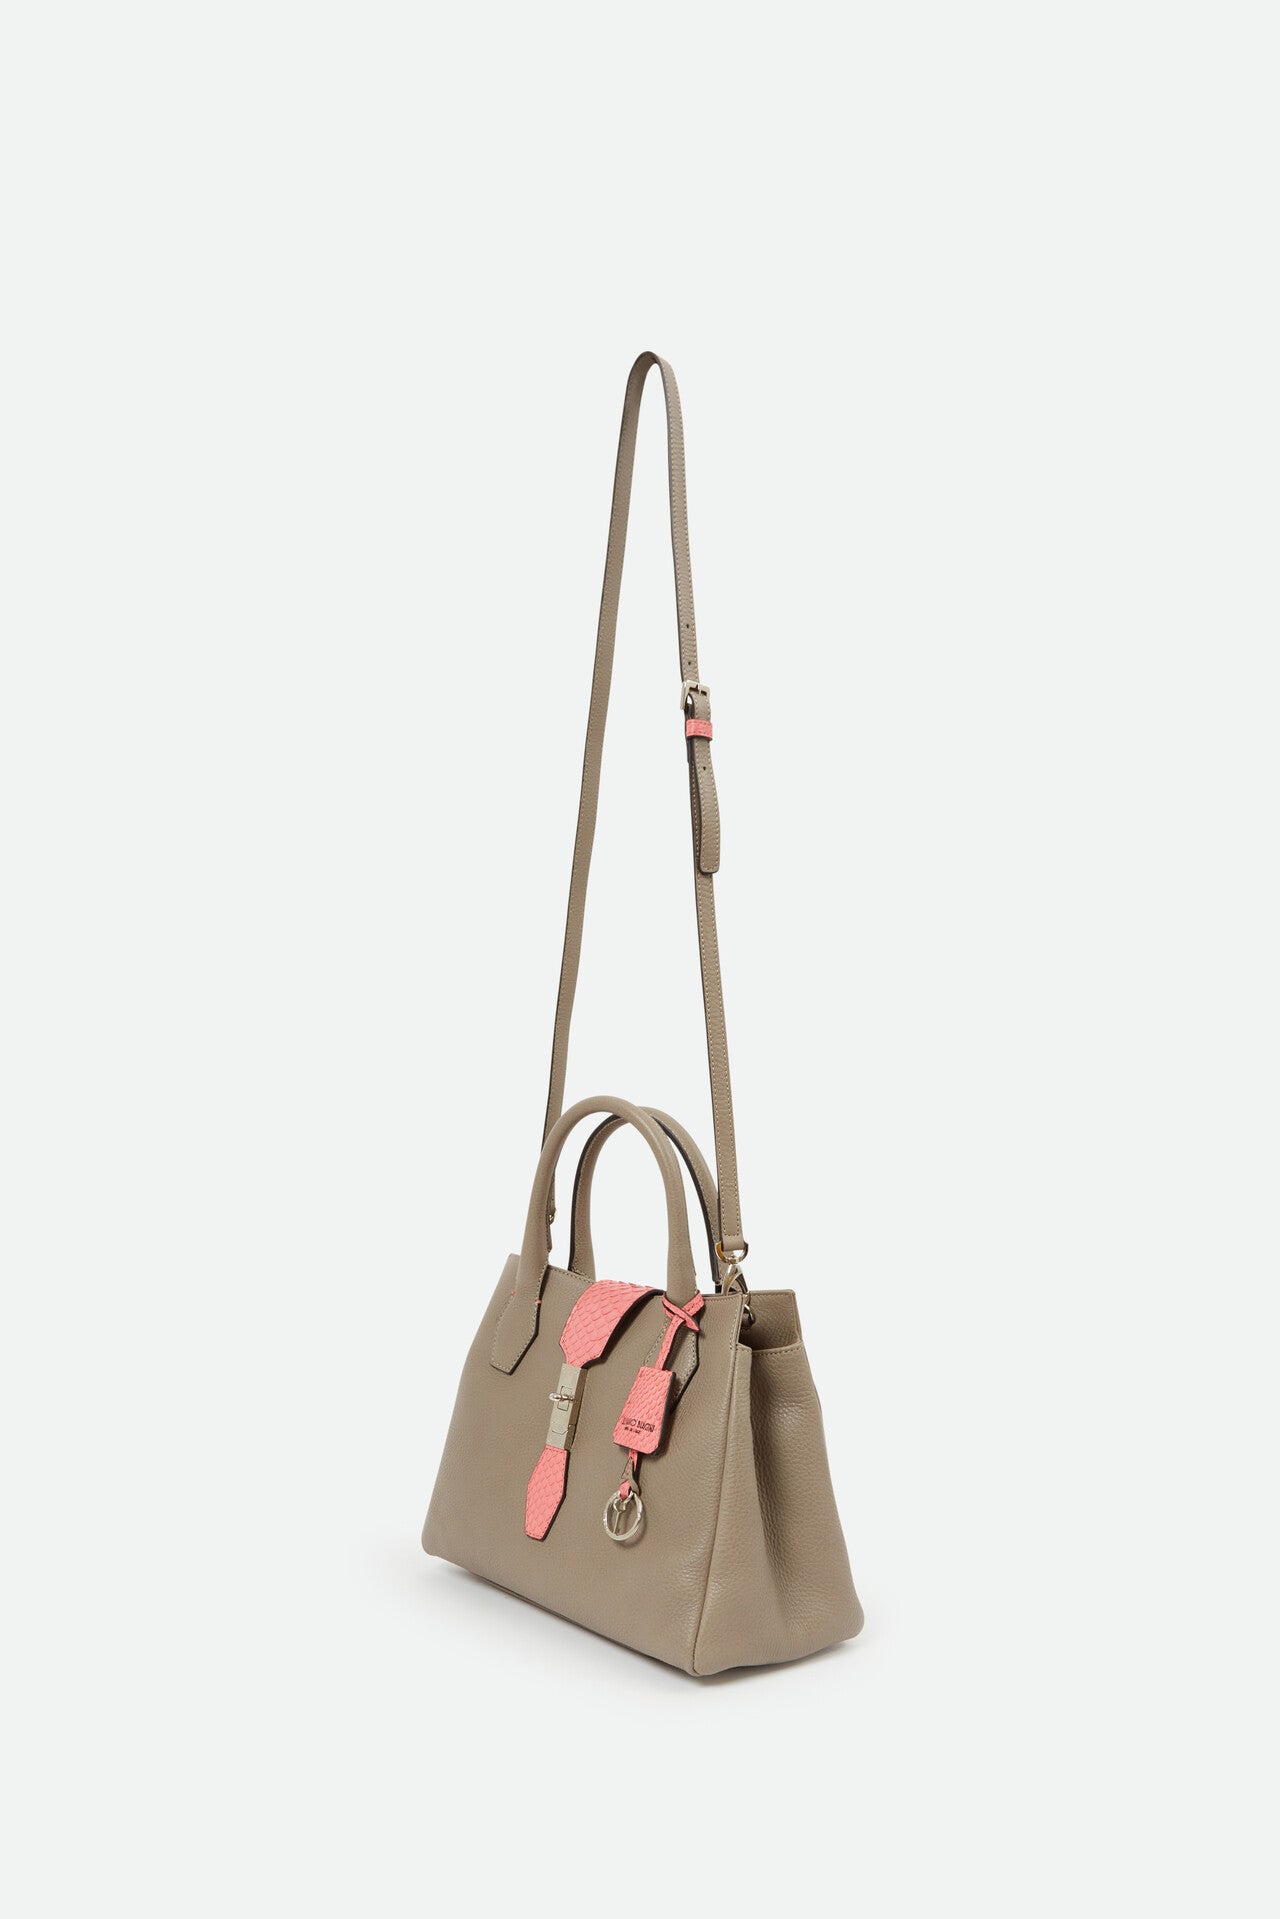 TAUPE AND PINK ACCENT CONVERTIBLE ITALIAN HANDBAG